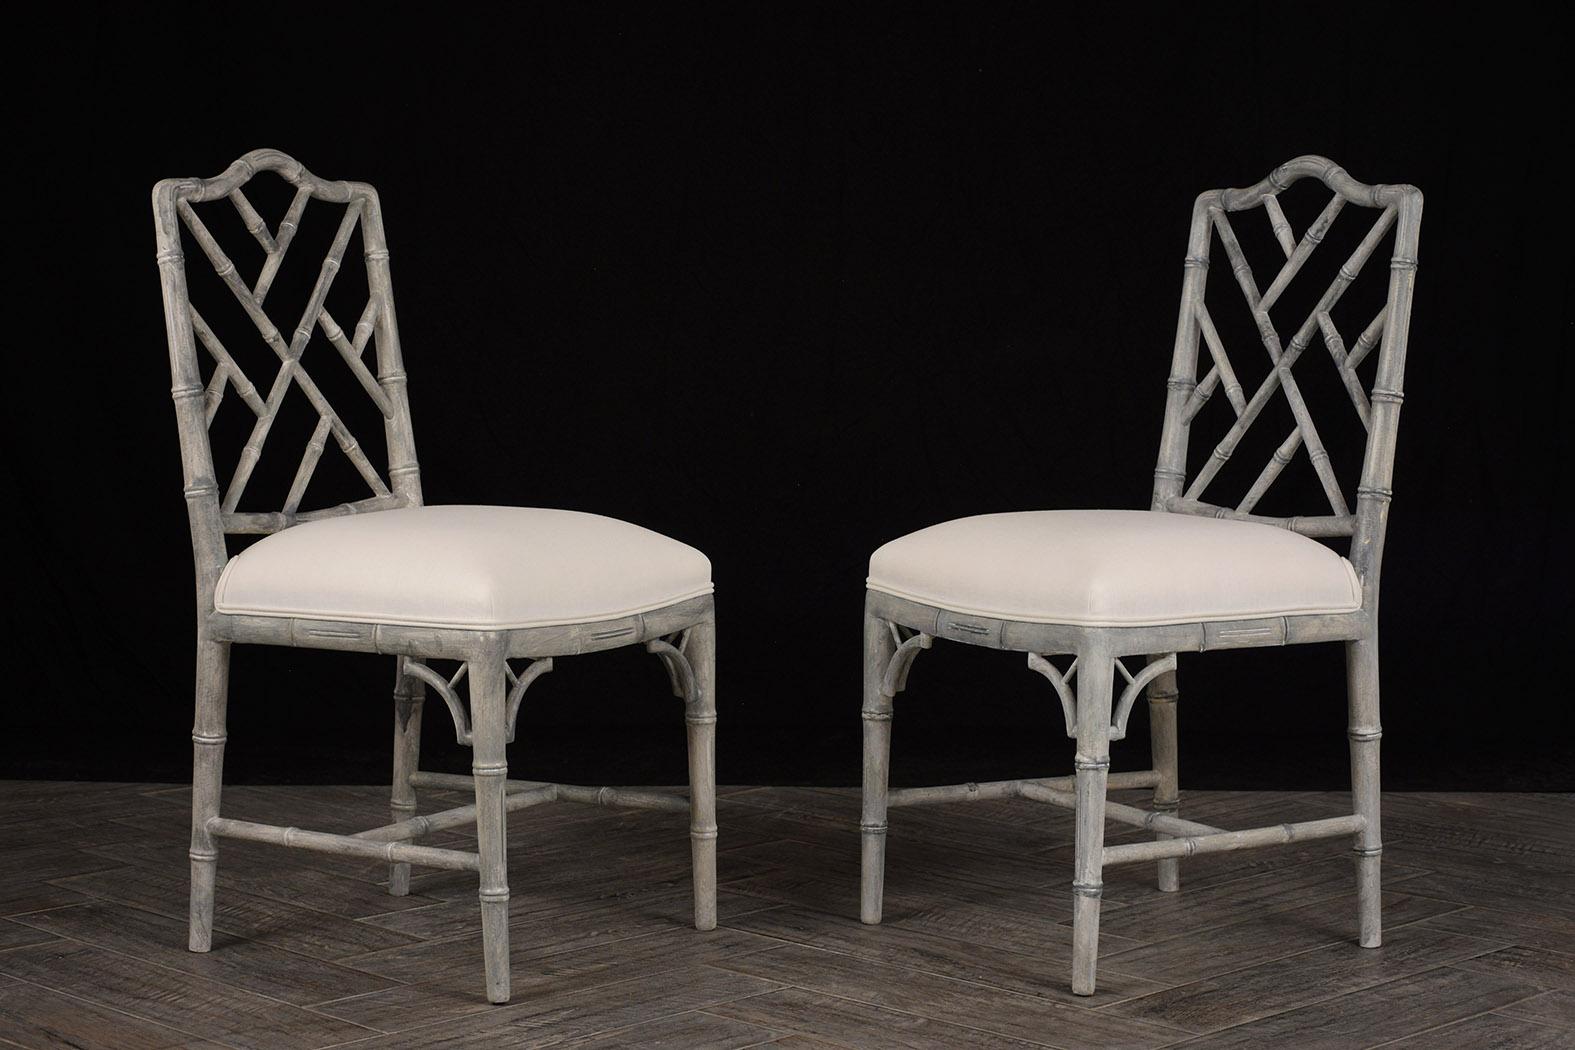 Two 1960s side chairs. Frames are carved with a bamboo-like design. The chairs have been newly painted in a pale gray color with a distressed finish. Seats have been professionally upholstered in a smooth comfortable off-white Belgium linen fabric